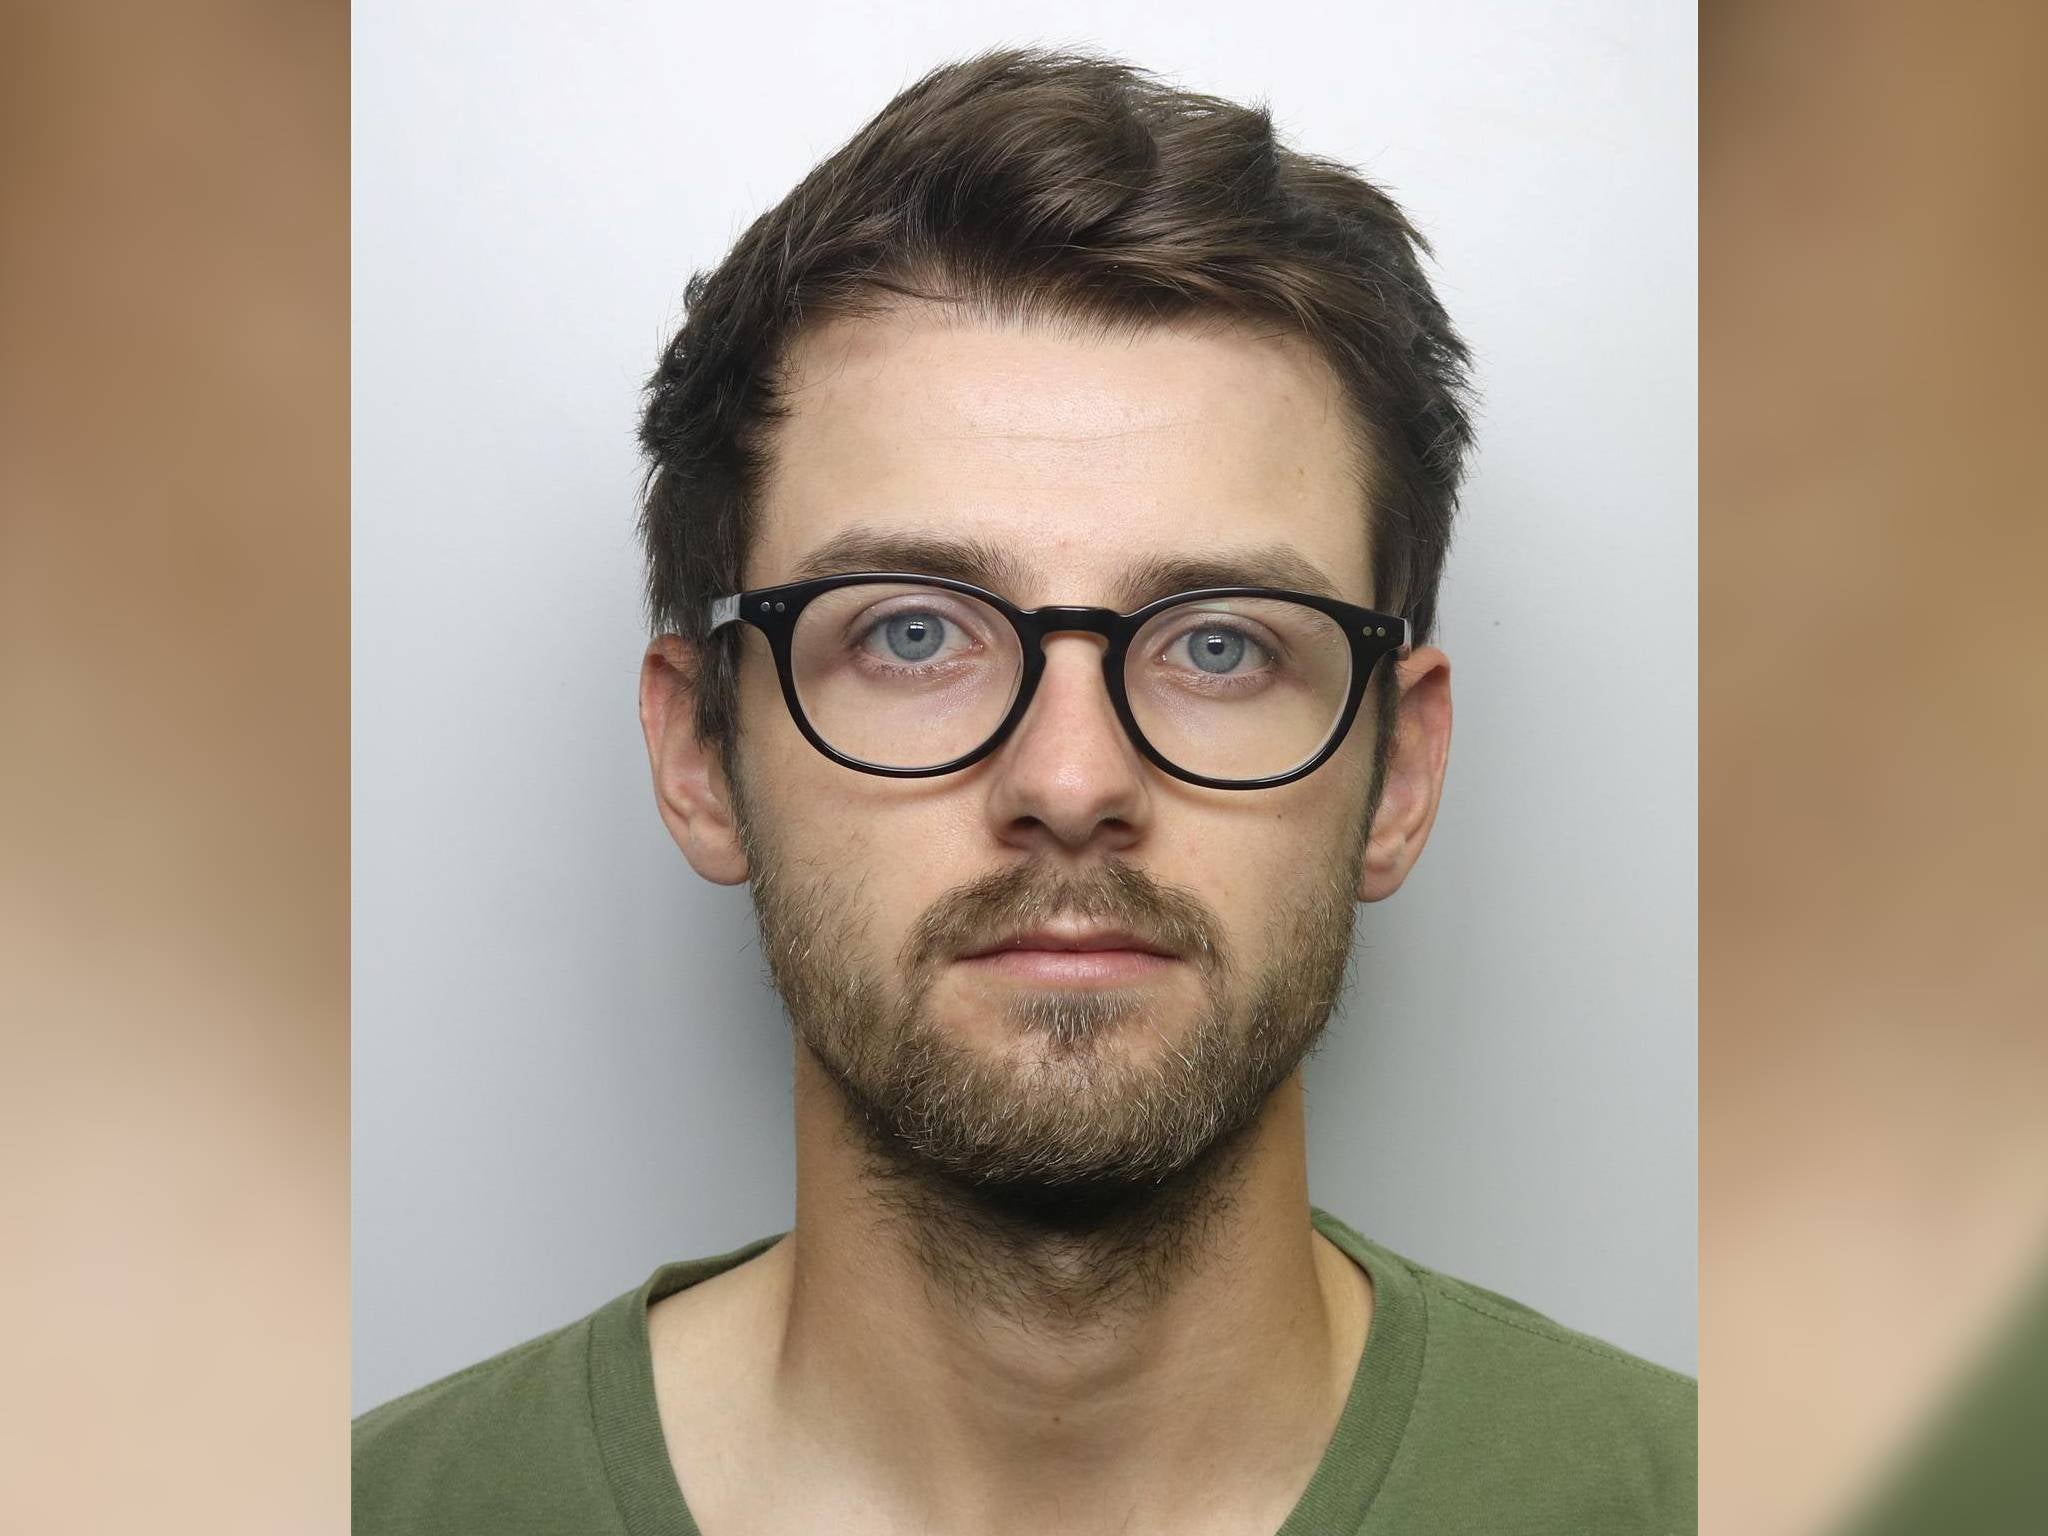 Jail for voyeur who secretly filmed people in bathrooms The Independent